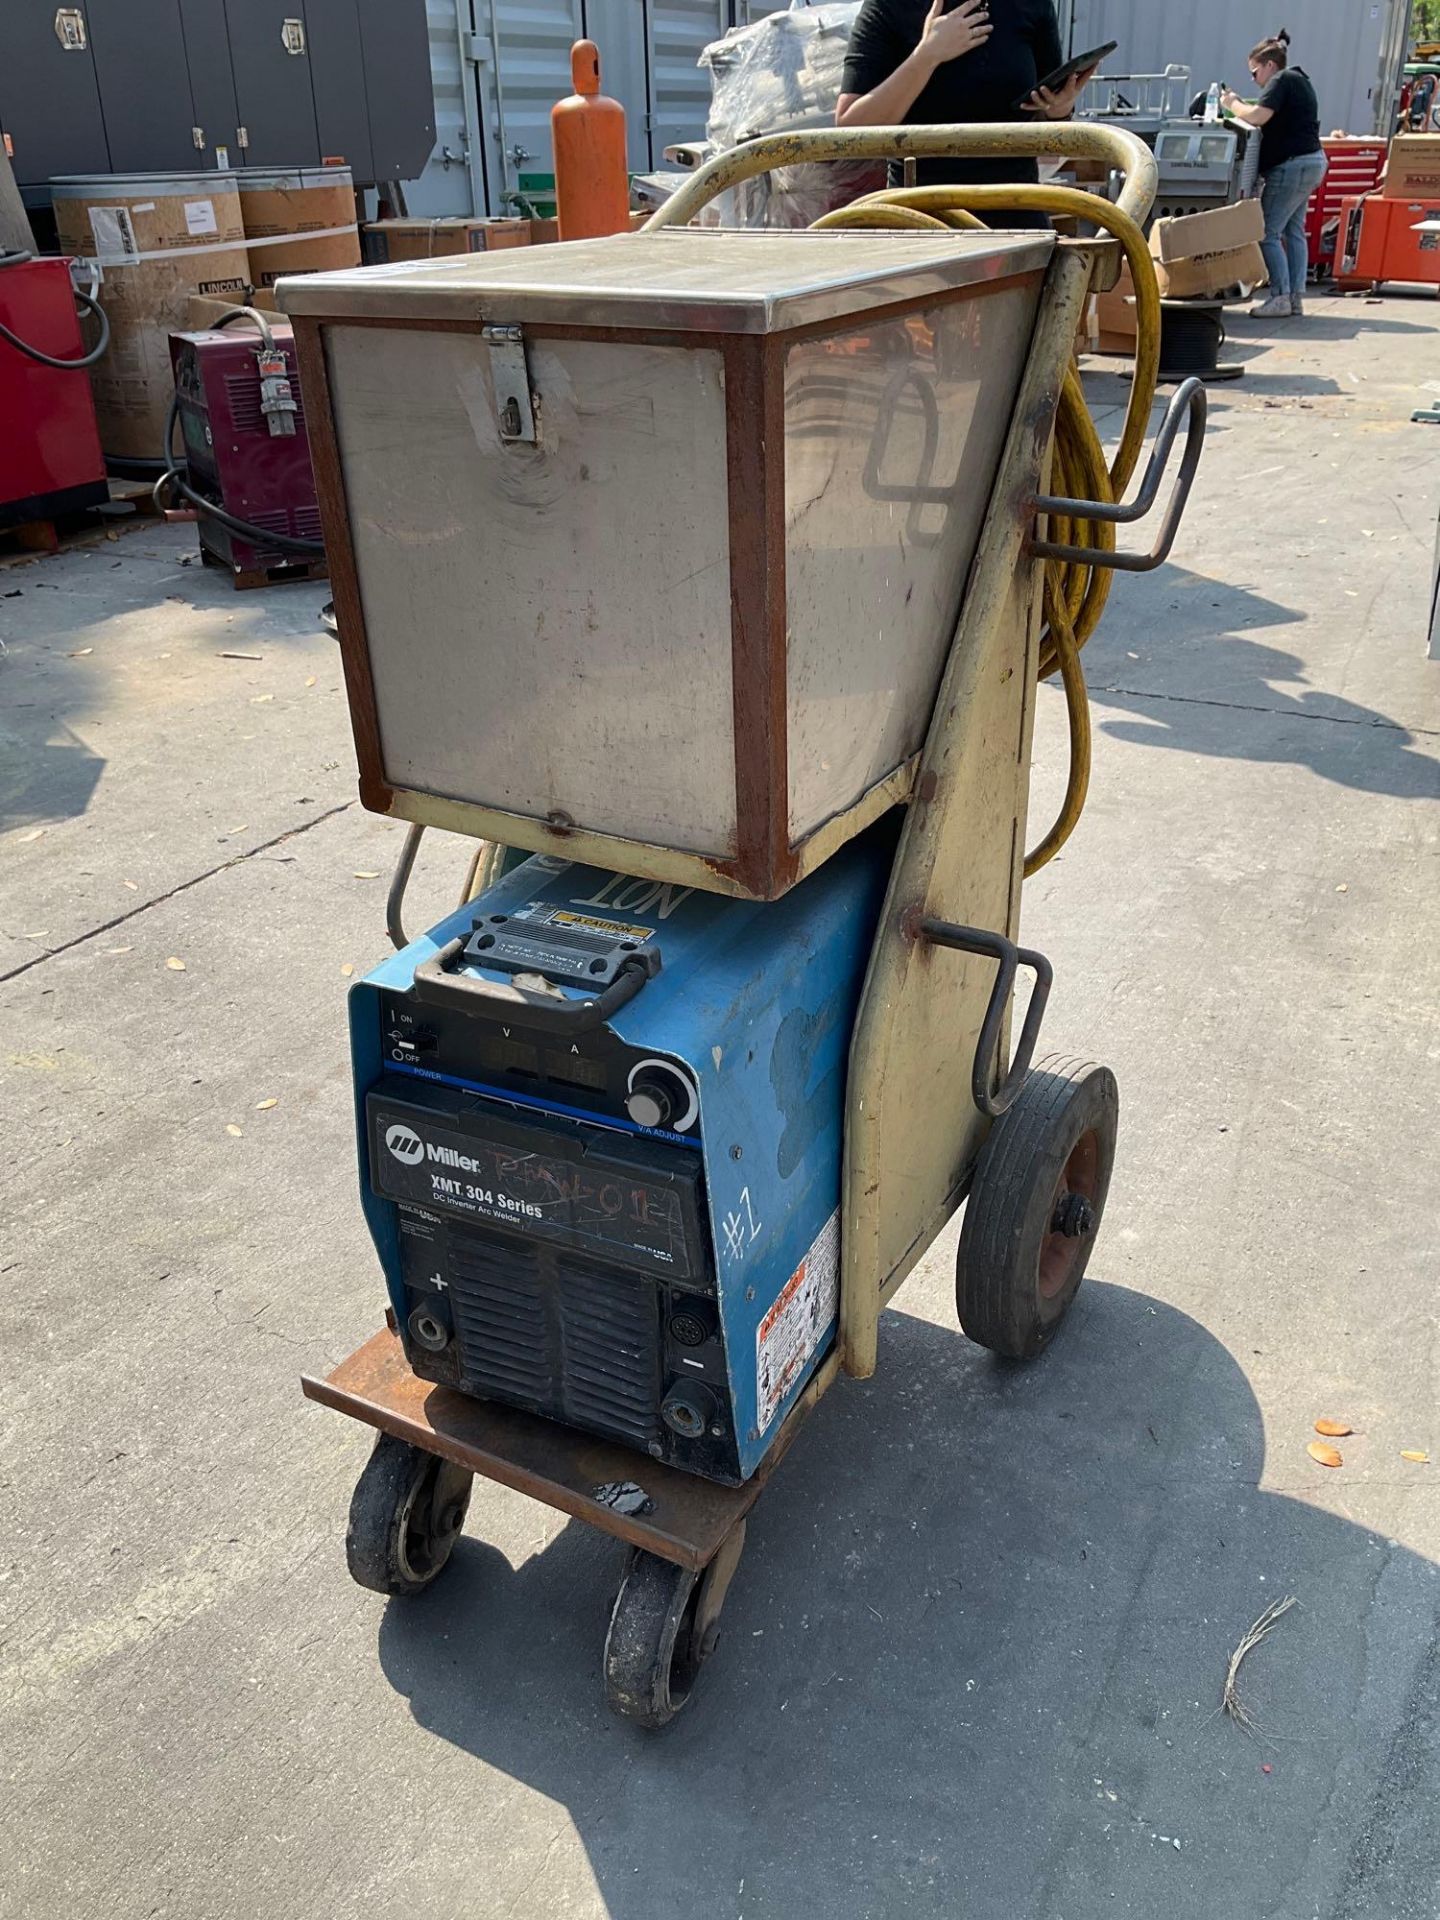 MILLER XMT 304 SERIES DC INVERTER ARC WELDER WITH CART & STORAGE BOX ATTACHED ,  PHASE 1/3 , APPROX